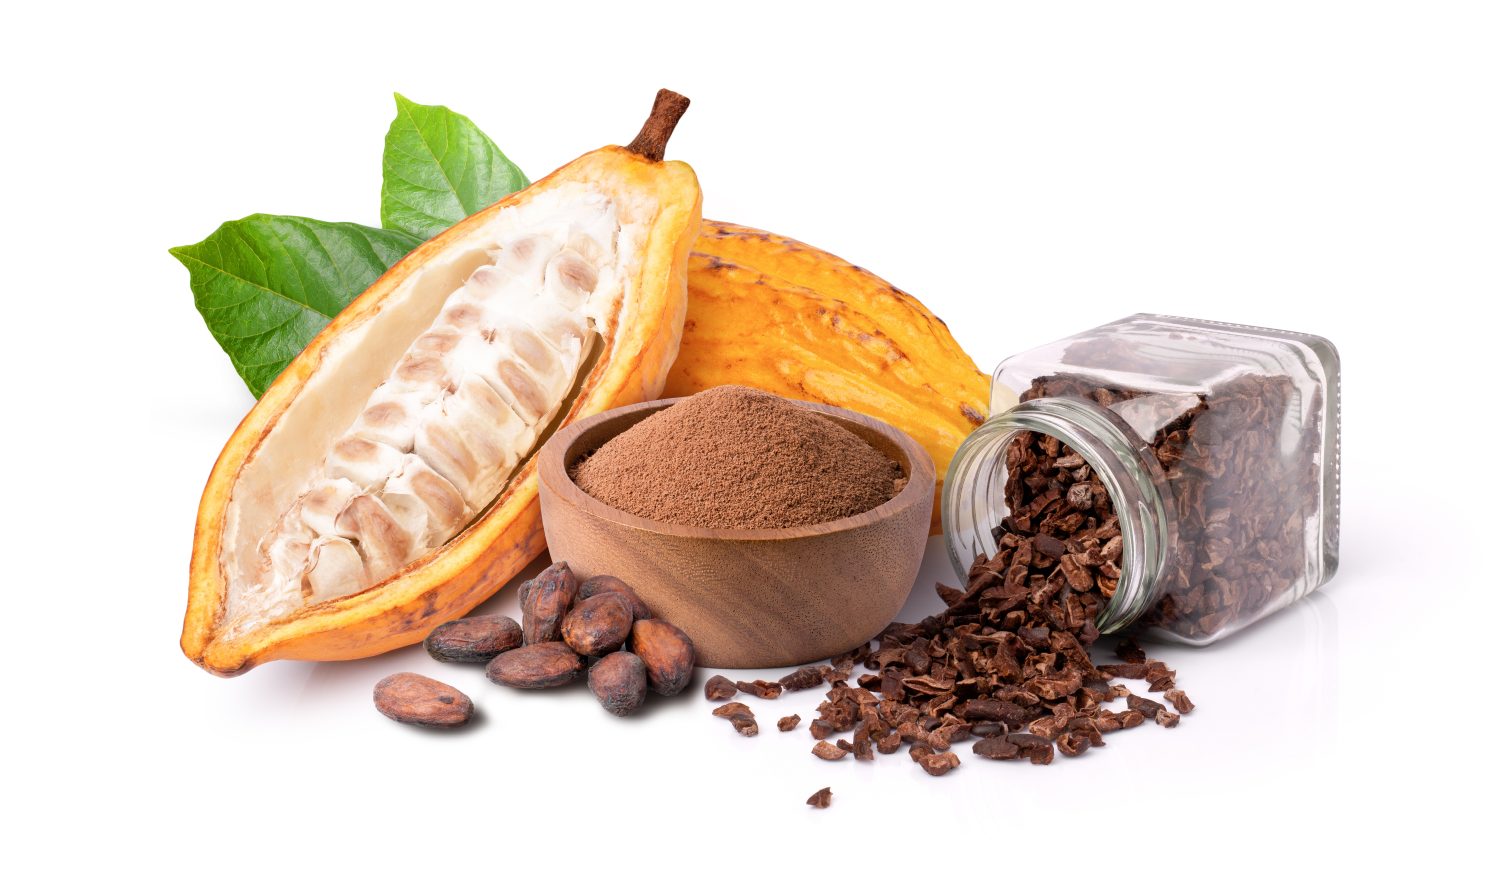 Cocoa fruit with powder in wooden bowl, dry cacao beans and cocoa nib in glass bottle isolated on white background.